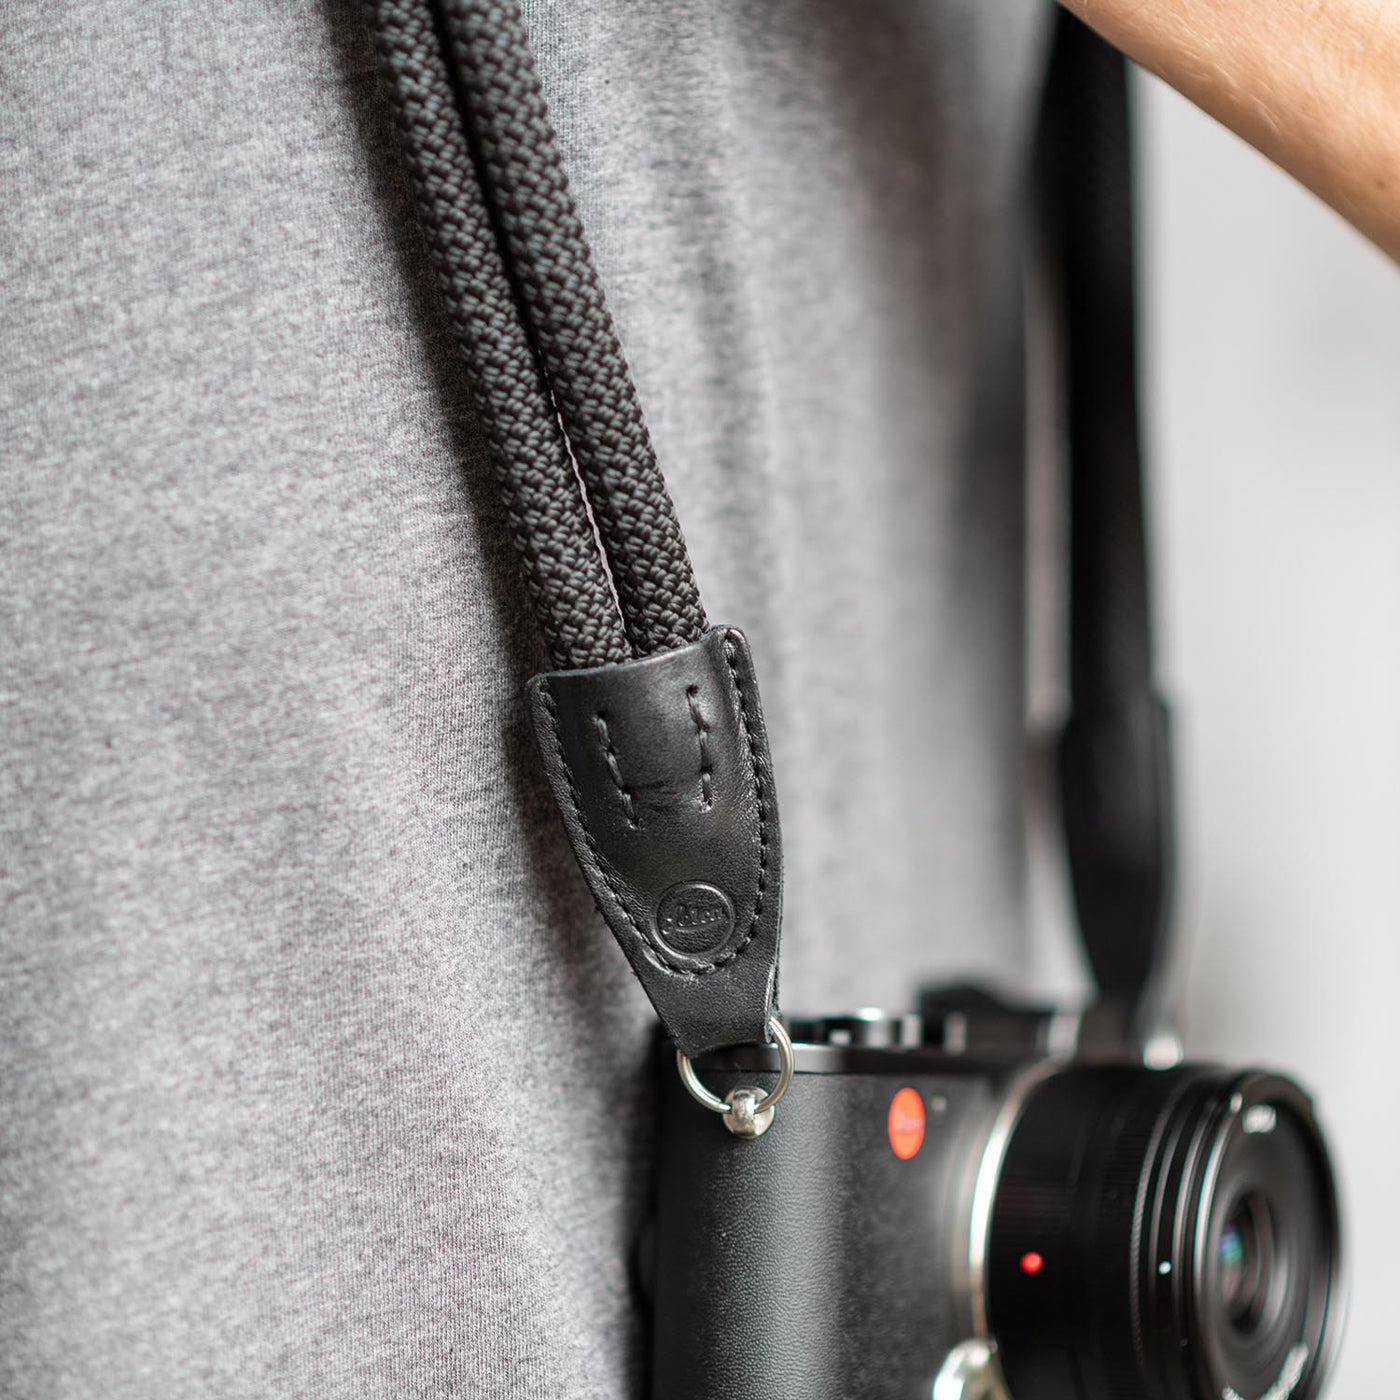 Leica camera on a photographer's hip held with black double rope strap 